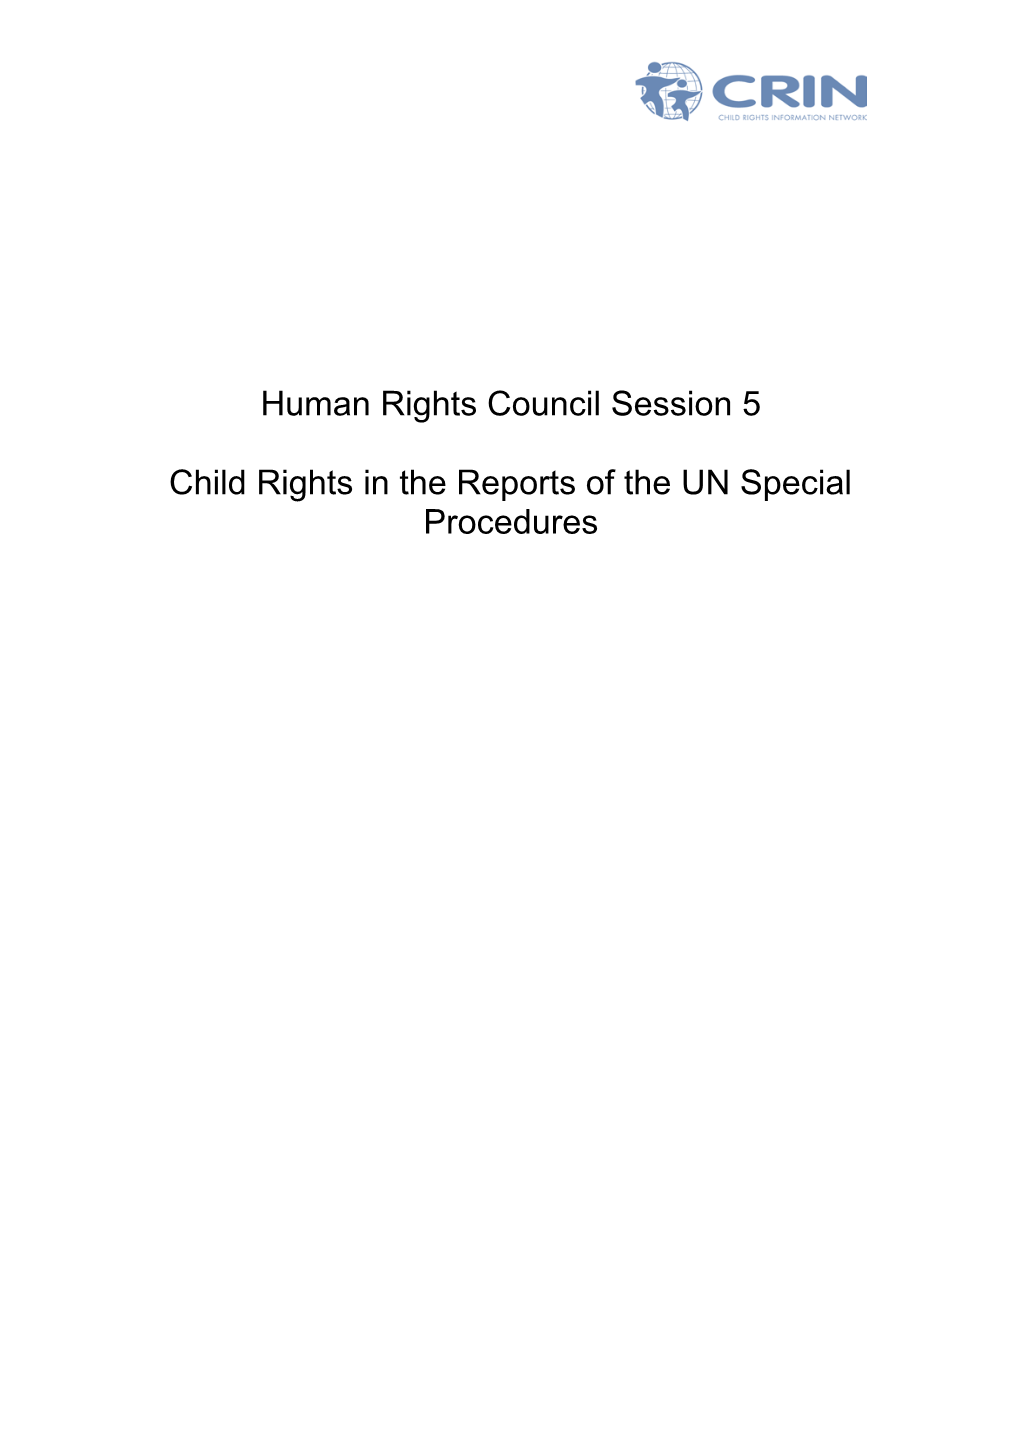 Human Rights Council Session 5 Child Rights in the Reports of the UN Special Procedures